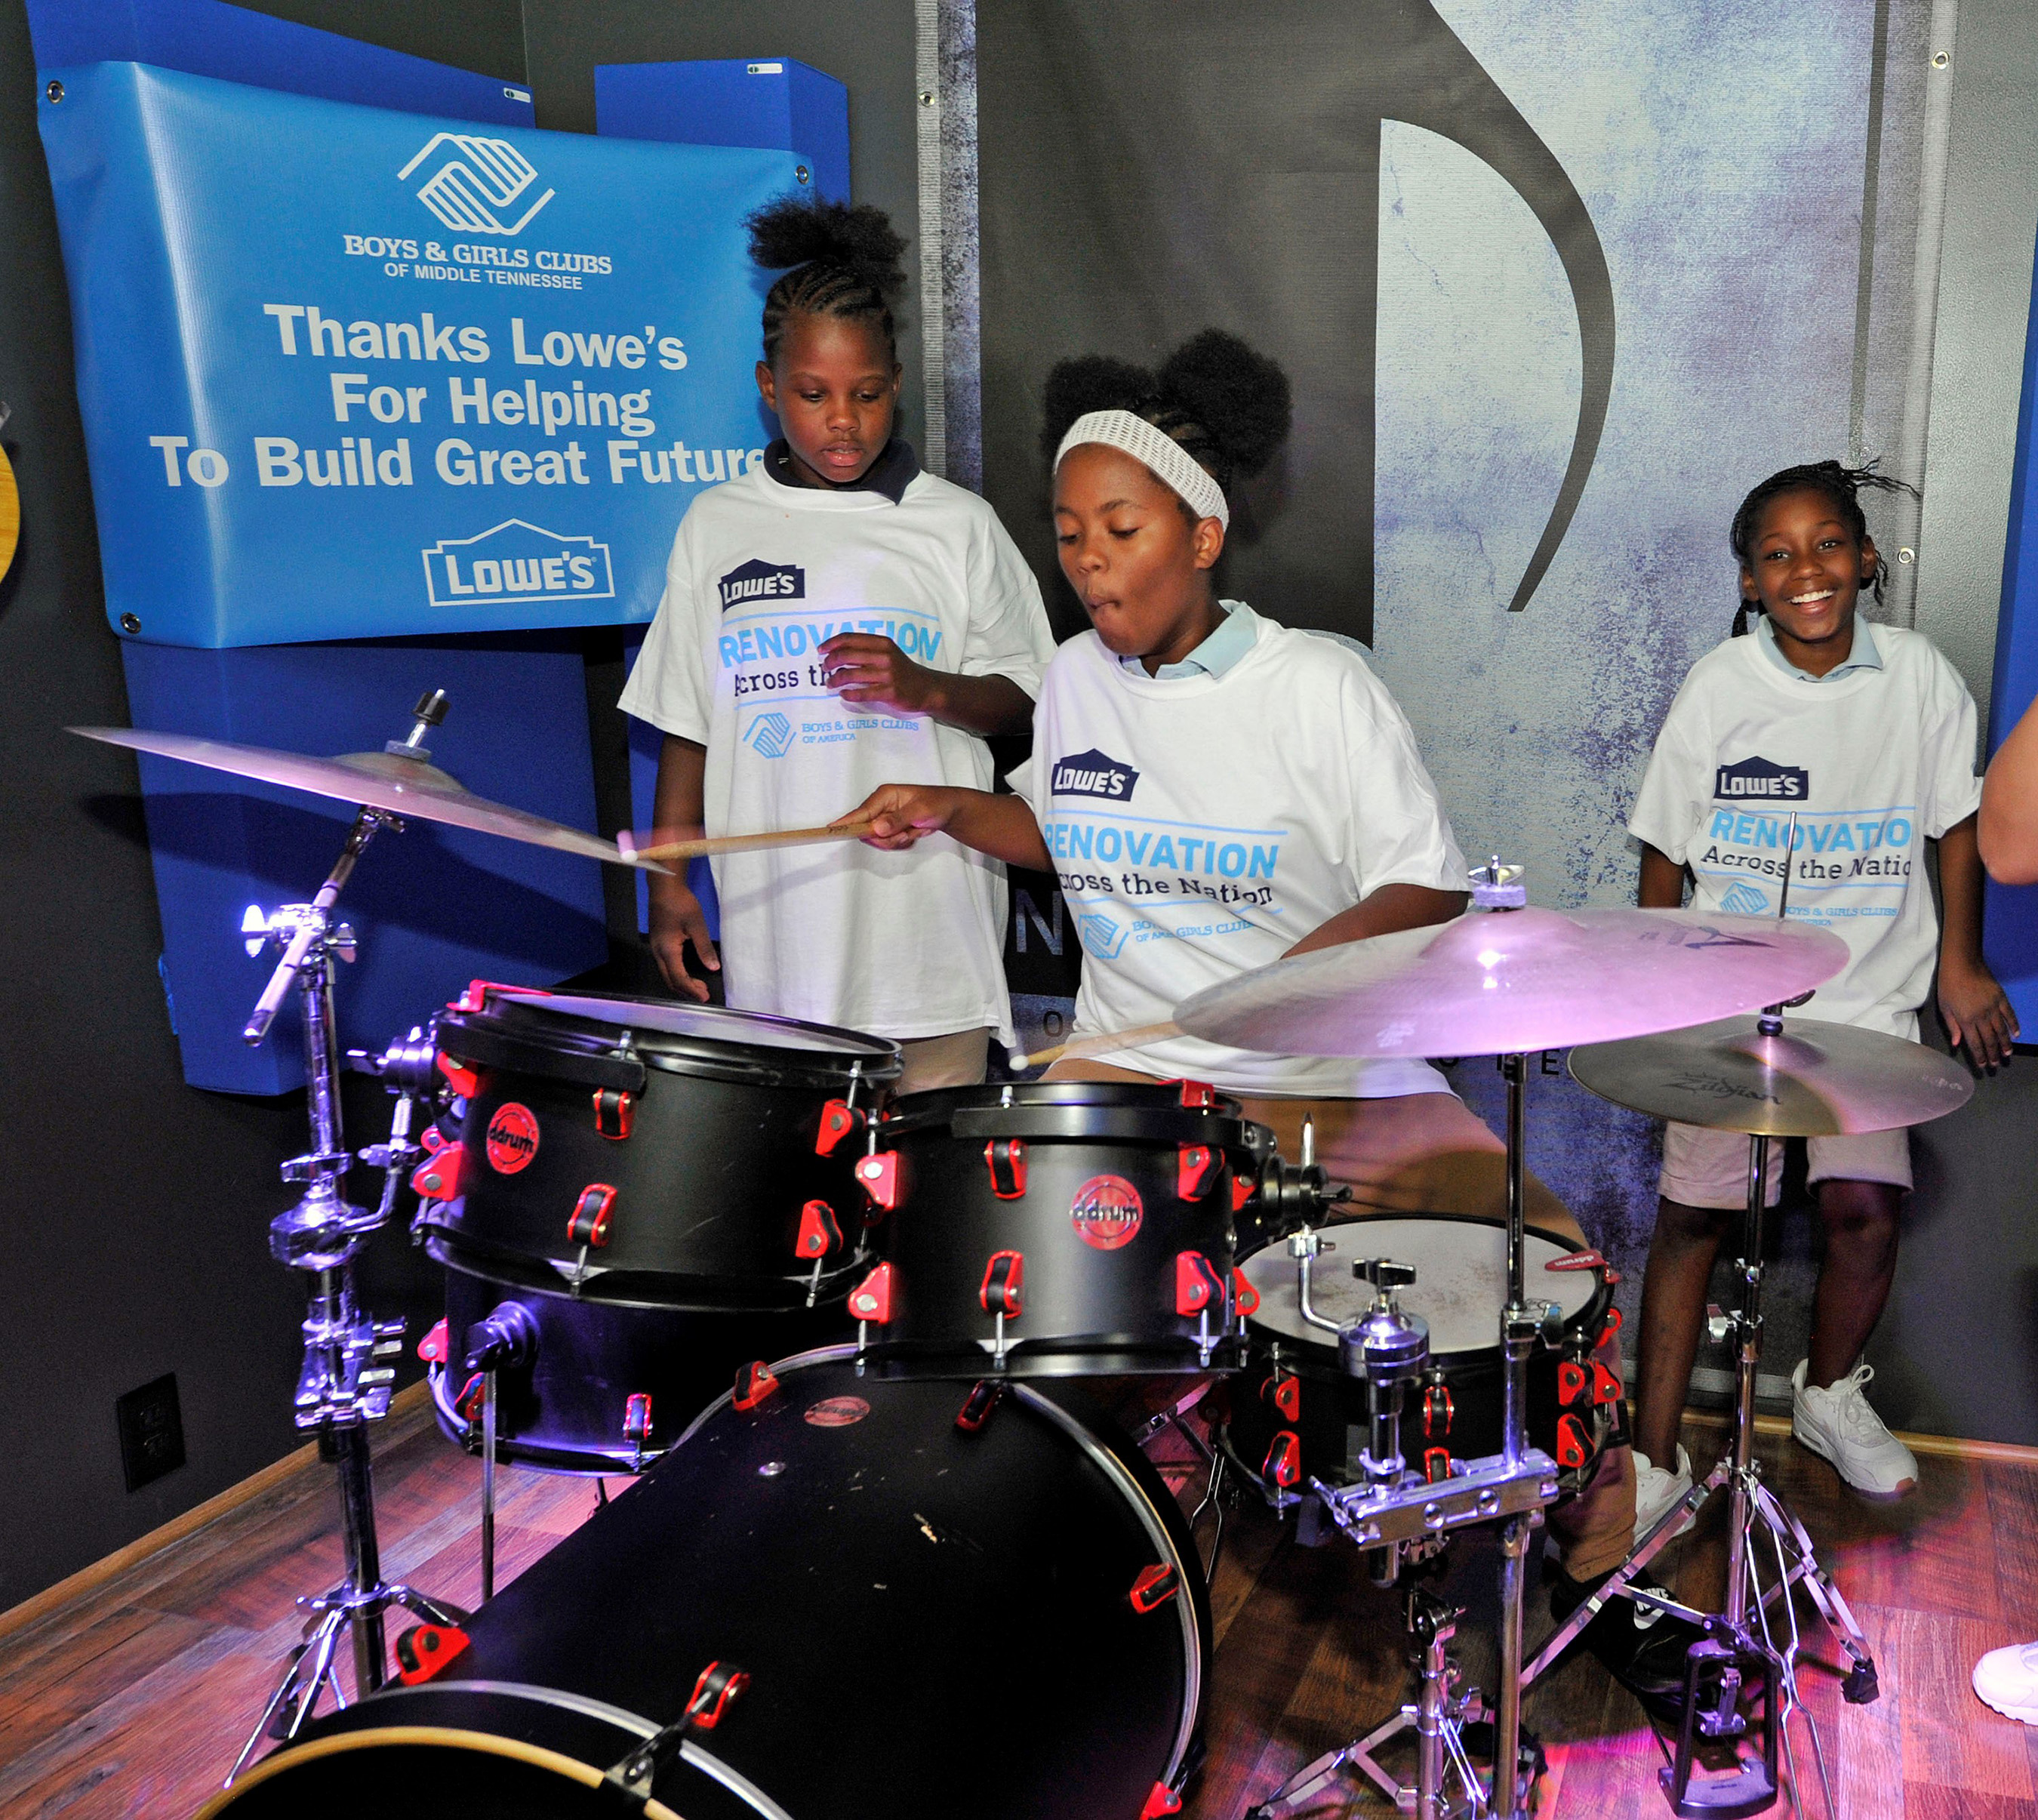 Lowe's and Boys & Girls Clubs of America announce the 2017 Renovation Across the Nation program at the Preston Taylor Boys & Girls Club on Tuesday, August 8, 2017 in Nashville, Tenn.